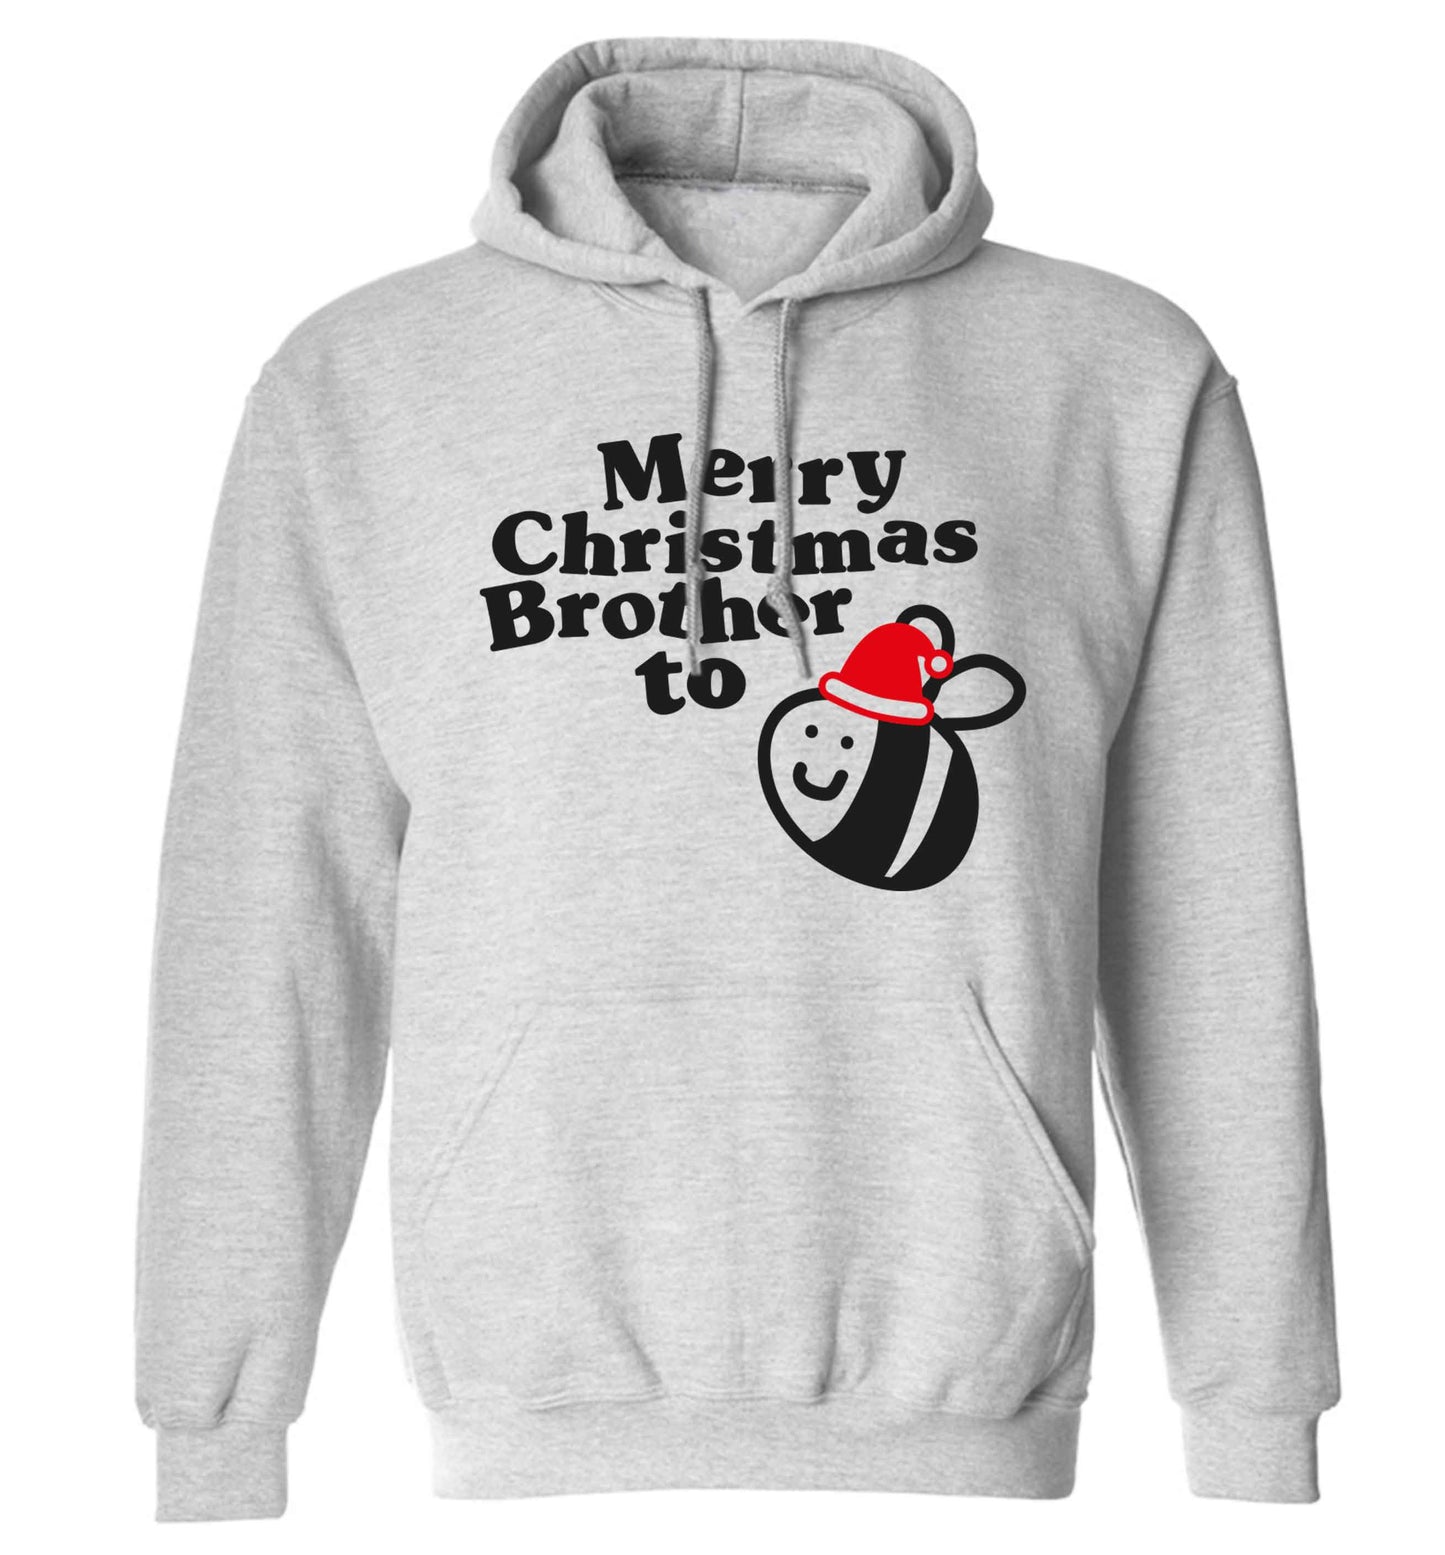 Merry Christmas brother to be adults unisex grey hoodie 2XL